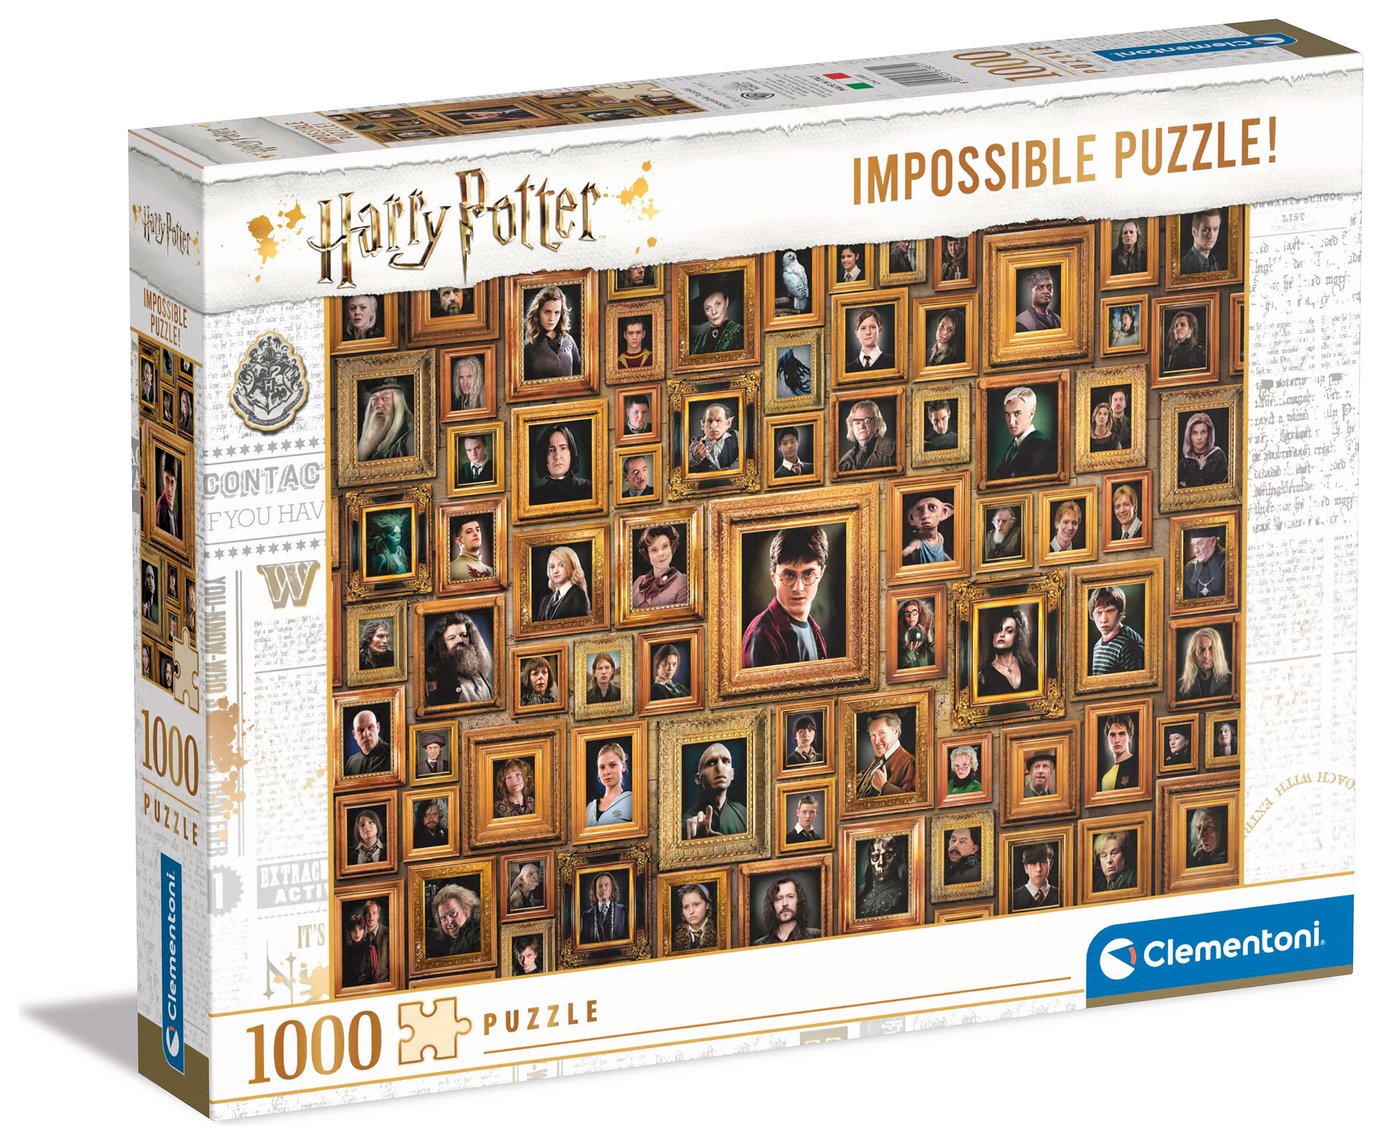 Harry Potter Impossible Jigsaw Puzzle